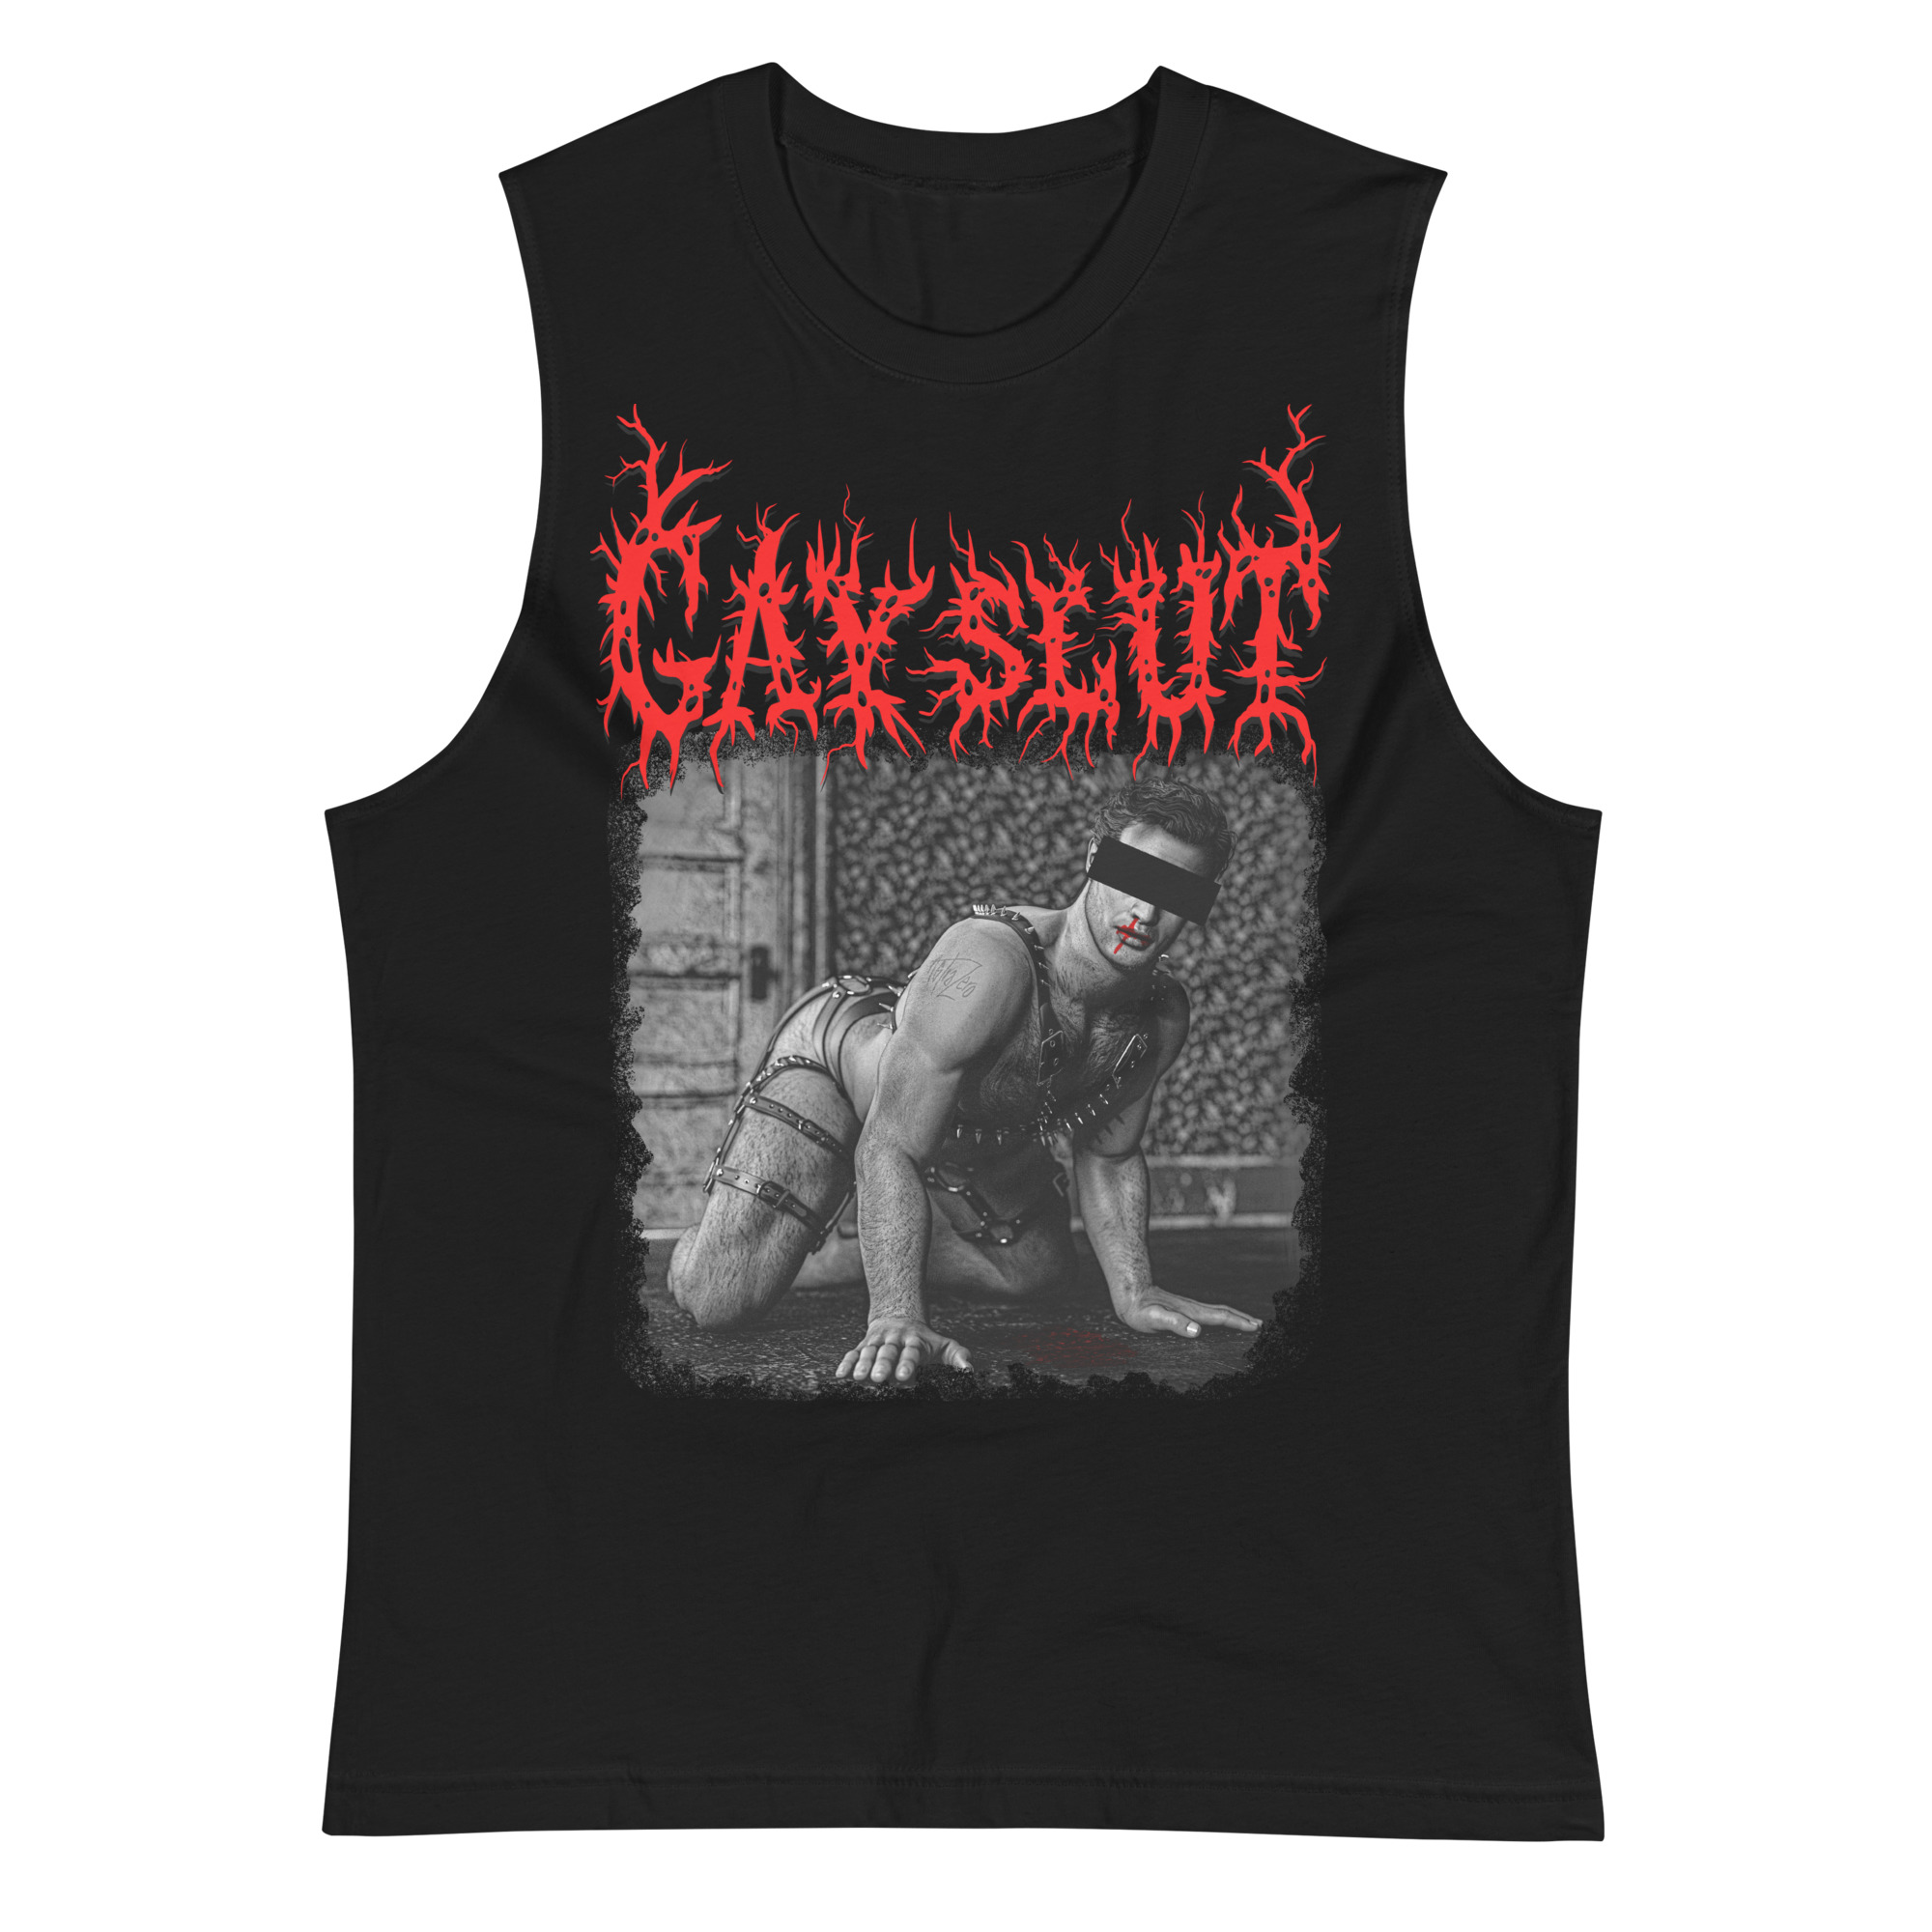 Featured image for “Gay Sl*t Metal - Muscle Shirt”